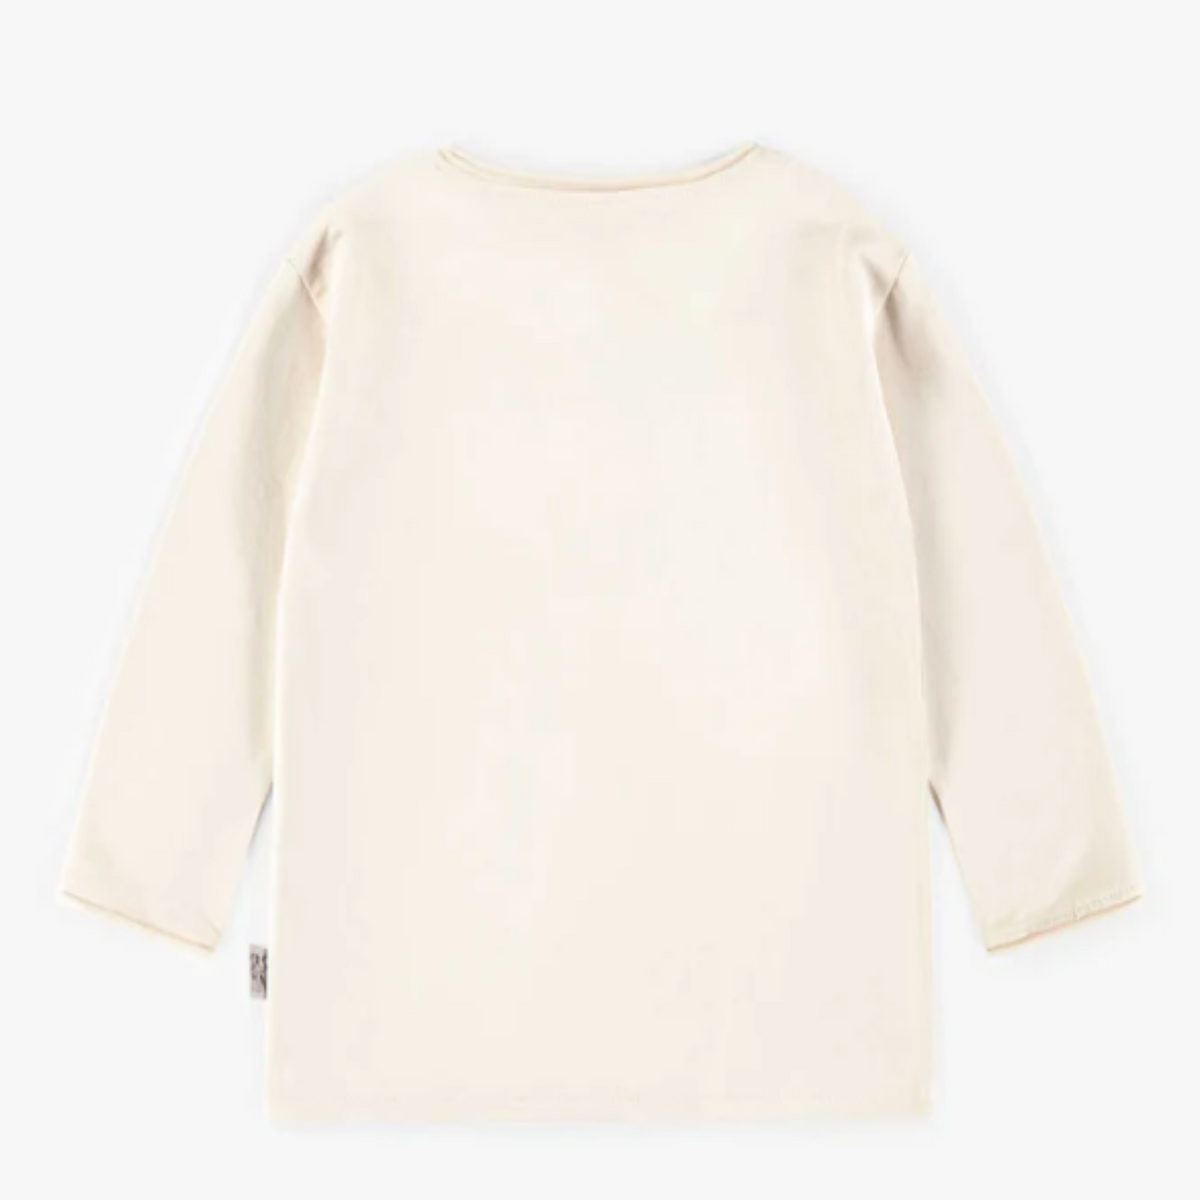 Cream long-sleeved t-shirt in stretch cotton, baby